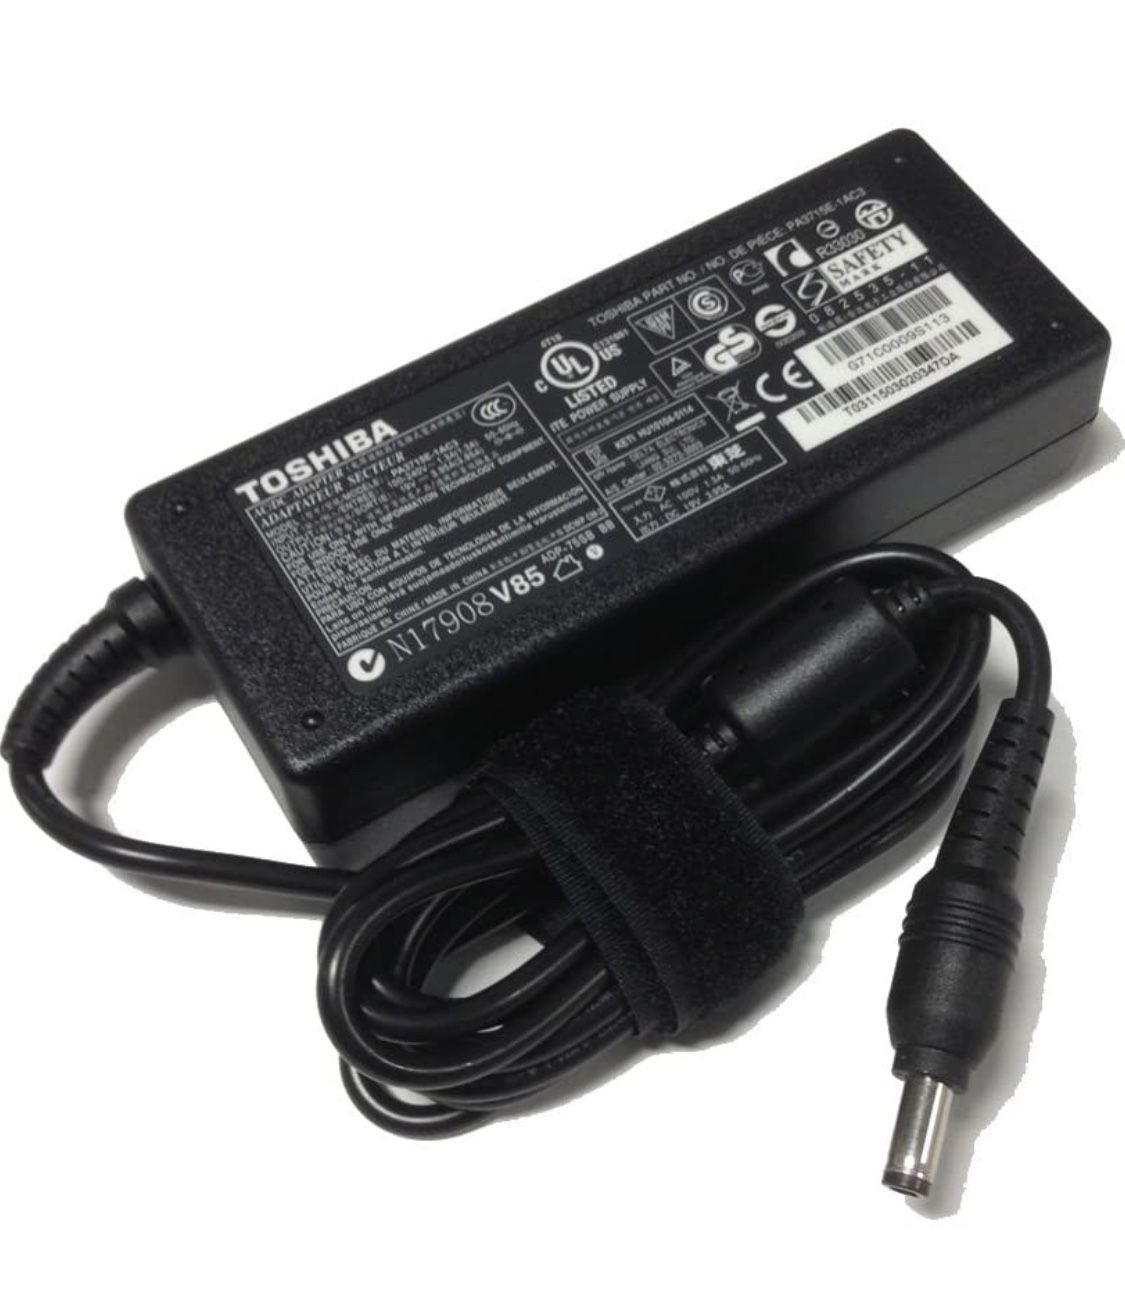 Toshiba Adapter Laptop Charger